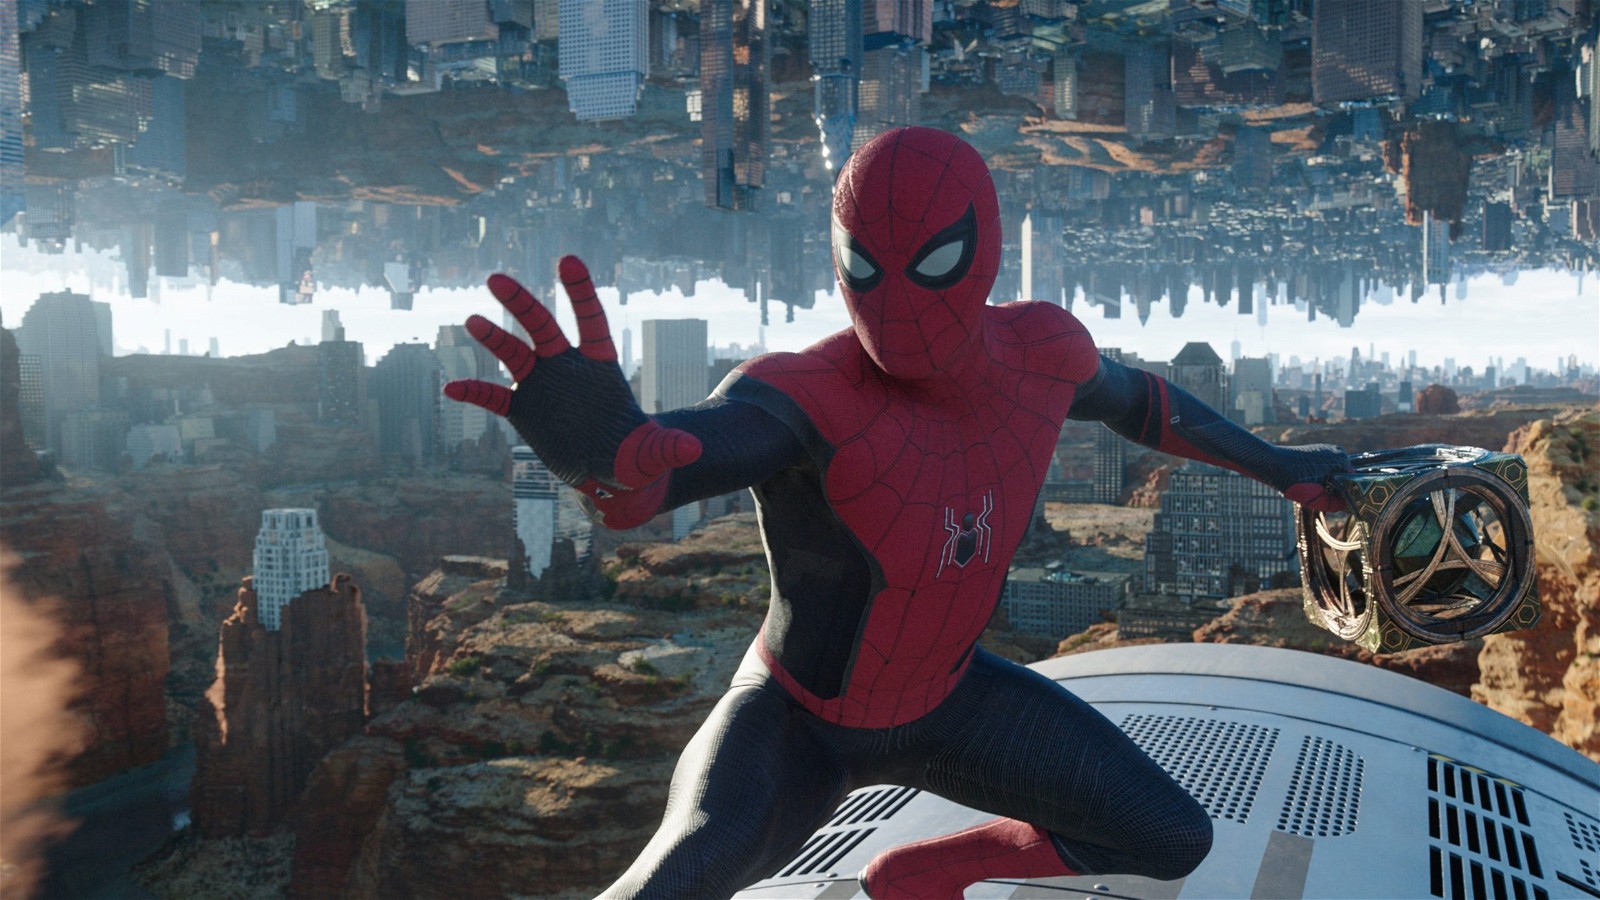 Some wild speculations are circulating online about the director of the next Spider-Man project after Spider-Man: No Way Home